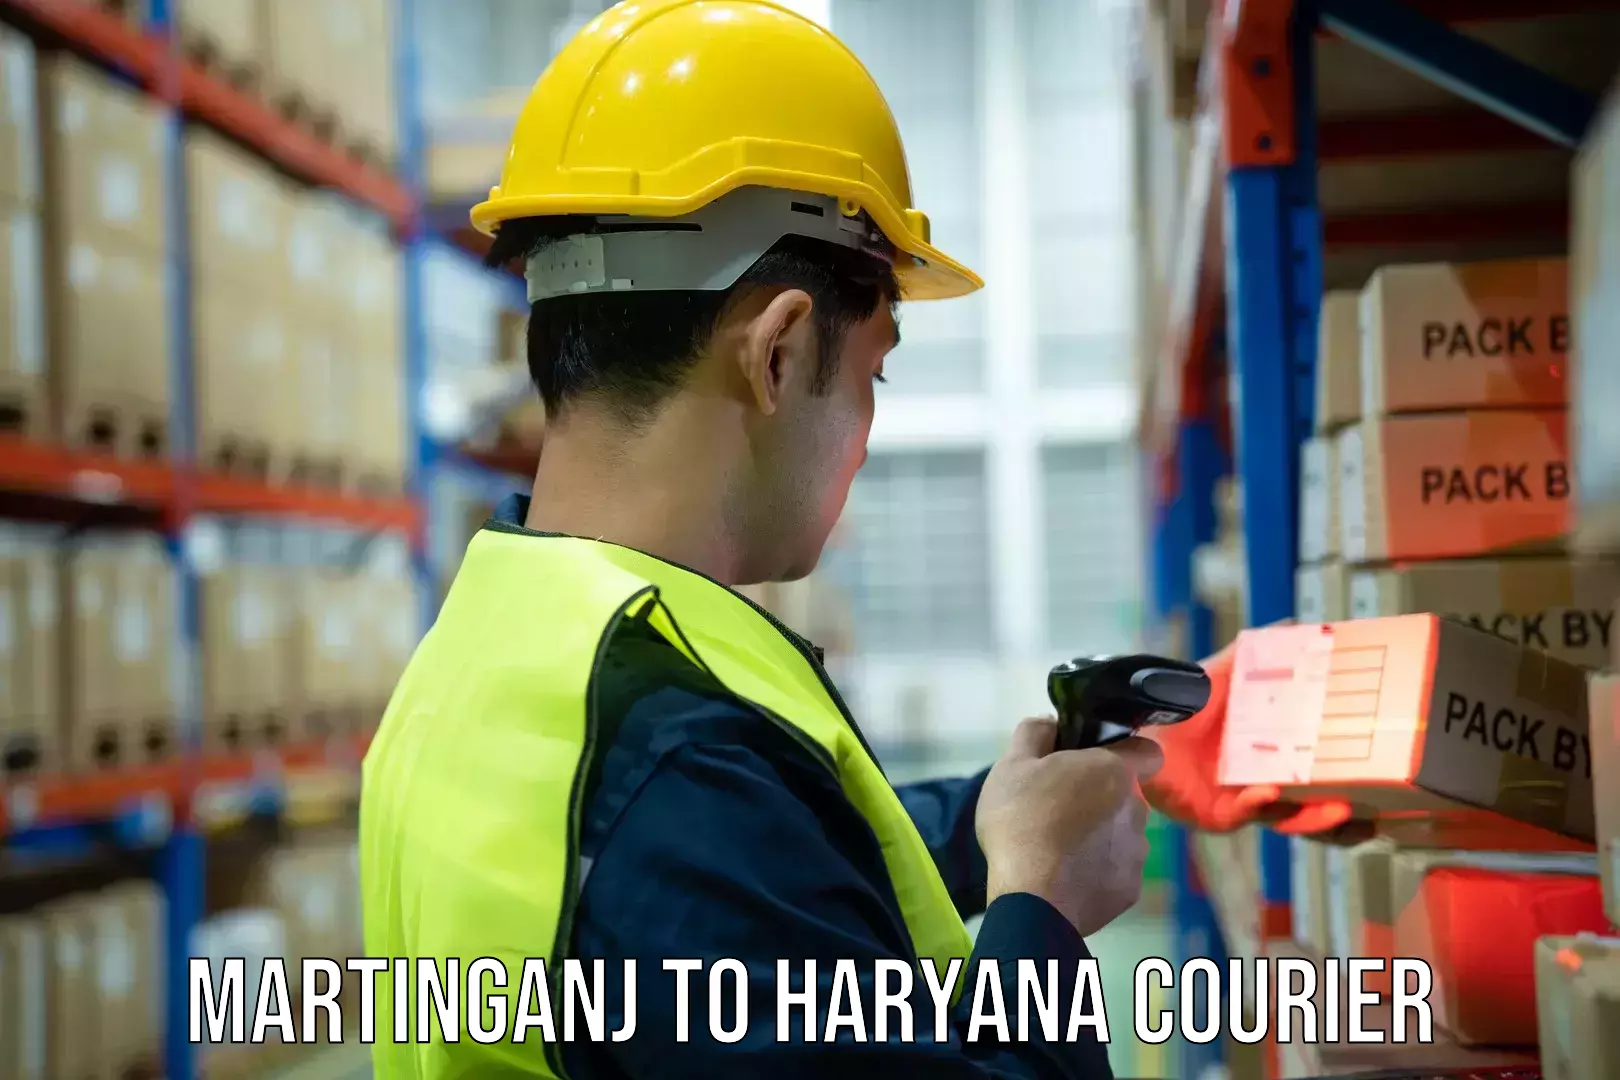 Flexible delivery schedules Martinganj to NCR Haryana